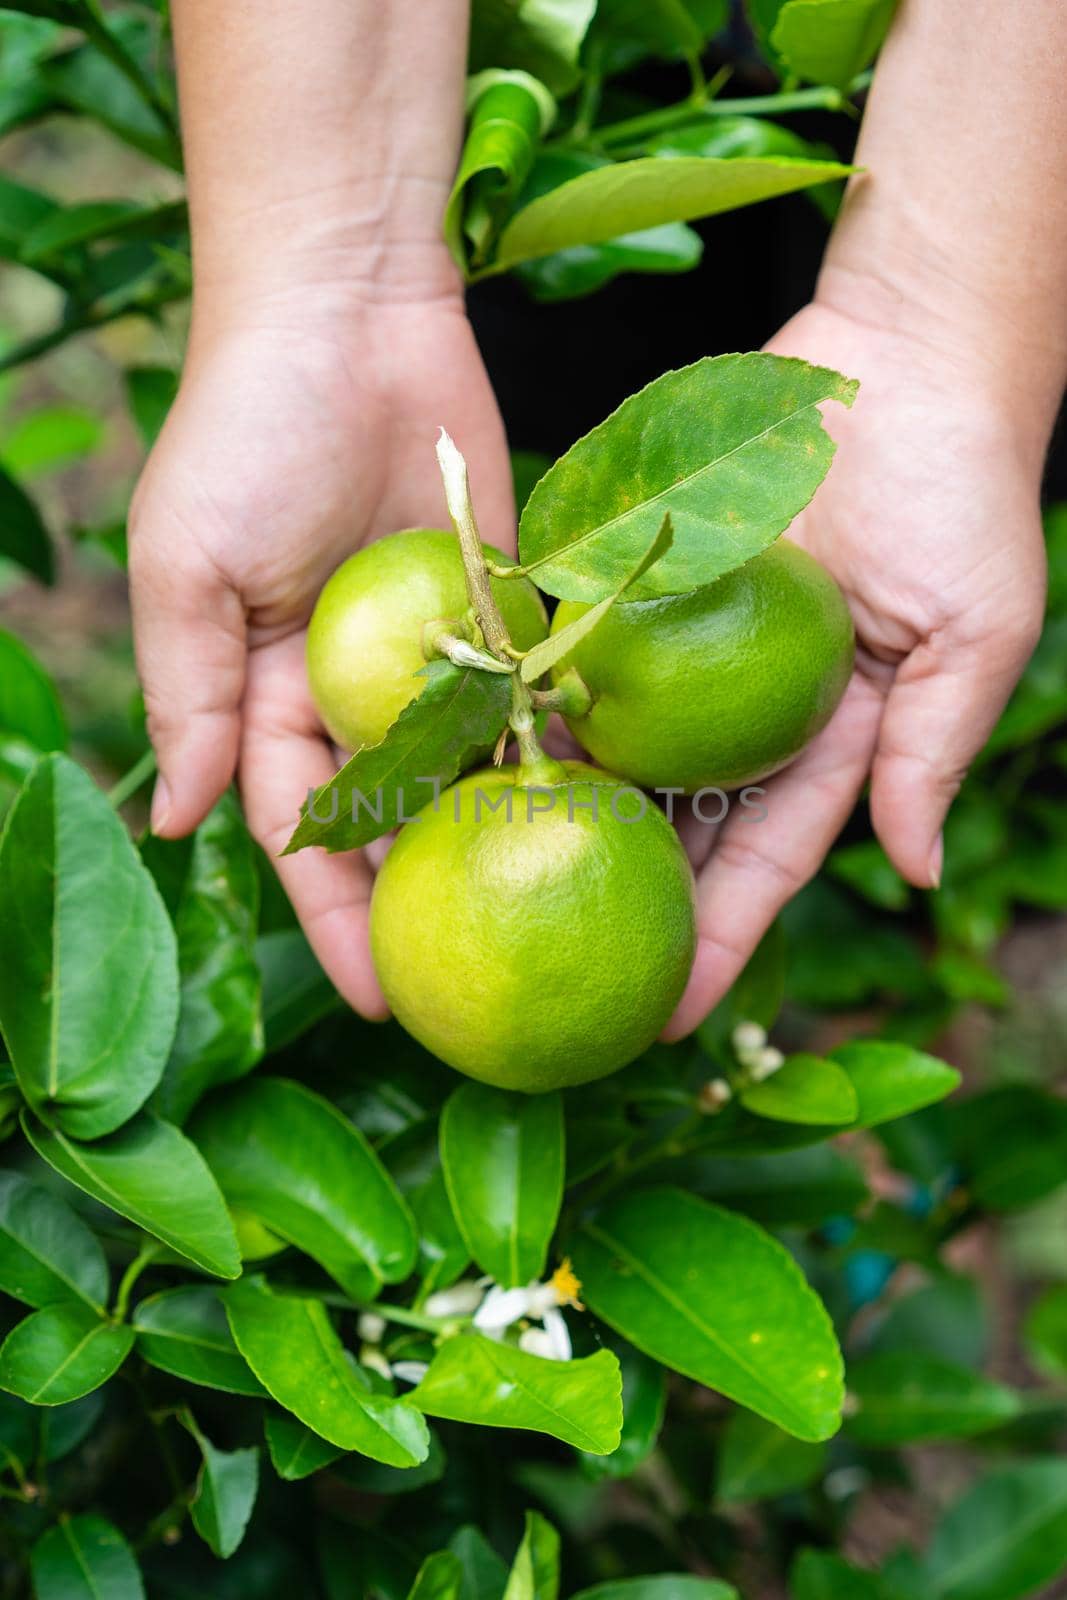 Green beautiful fresh limes in a woman's hand in the garden